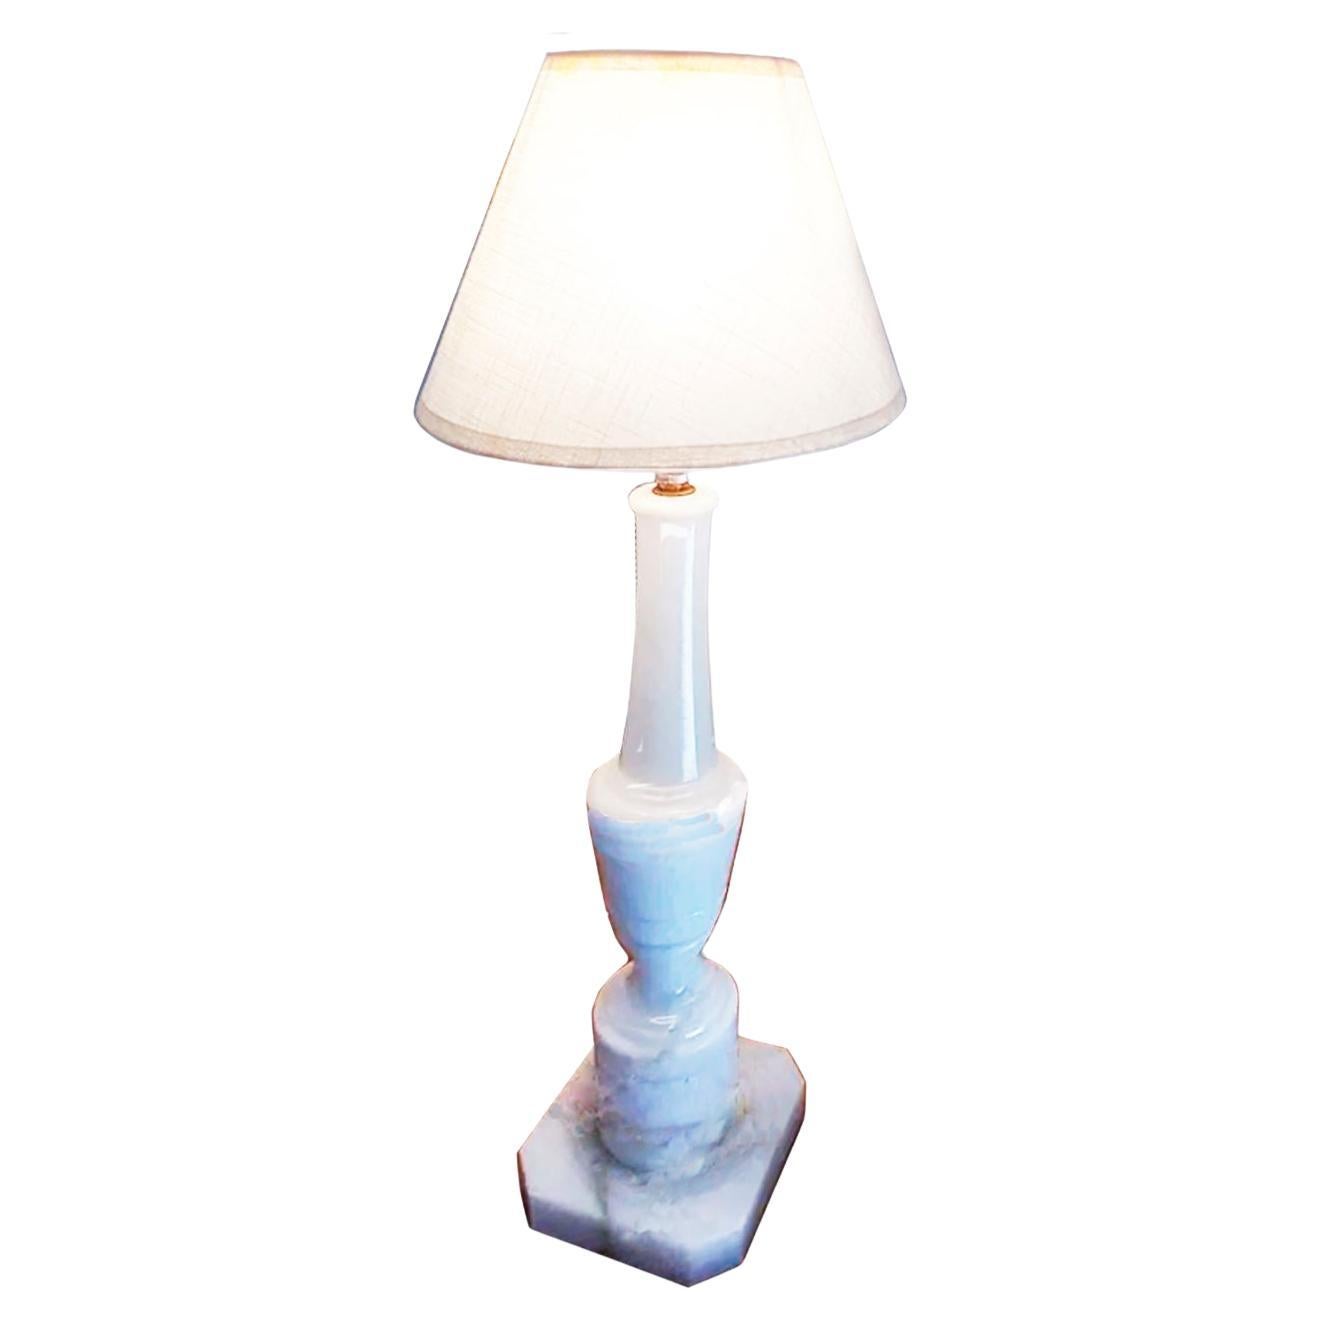 Spanish Alabaster Table Lamp White Color Spain, 40s-50s For Sale